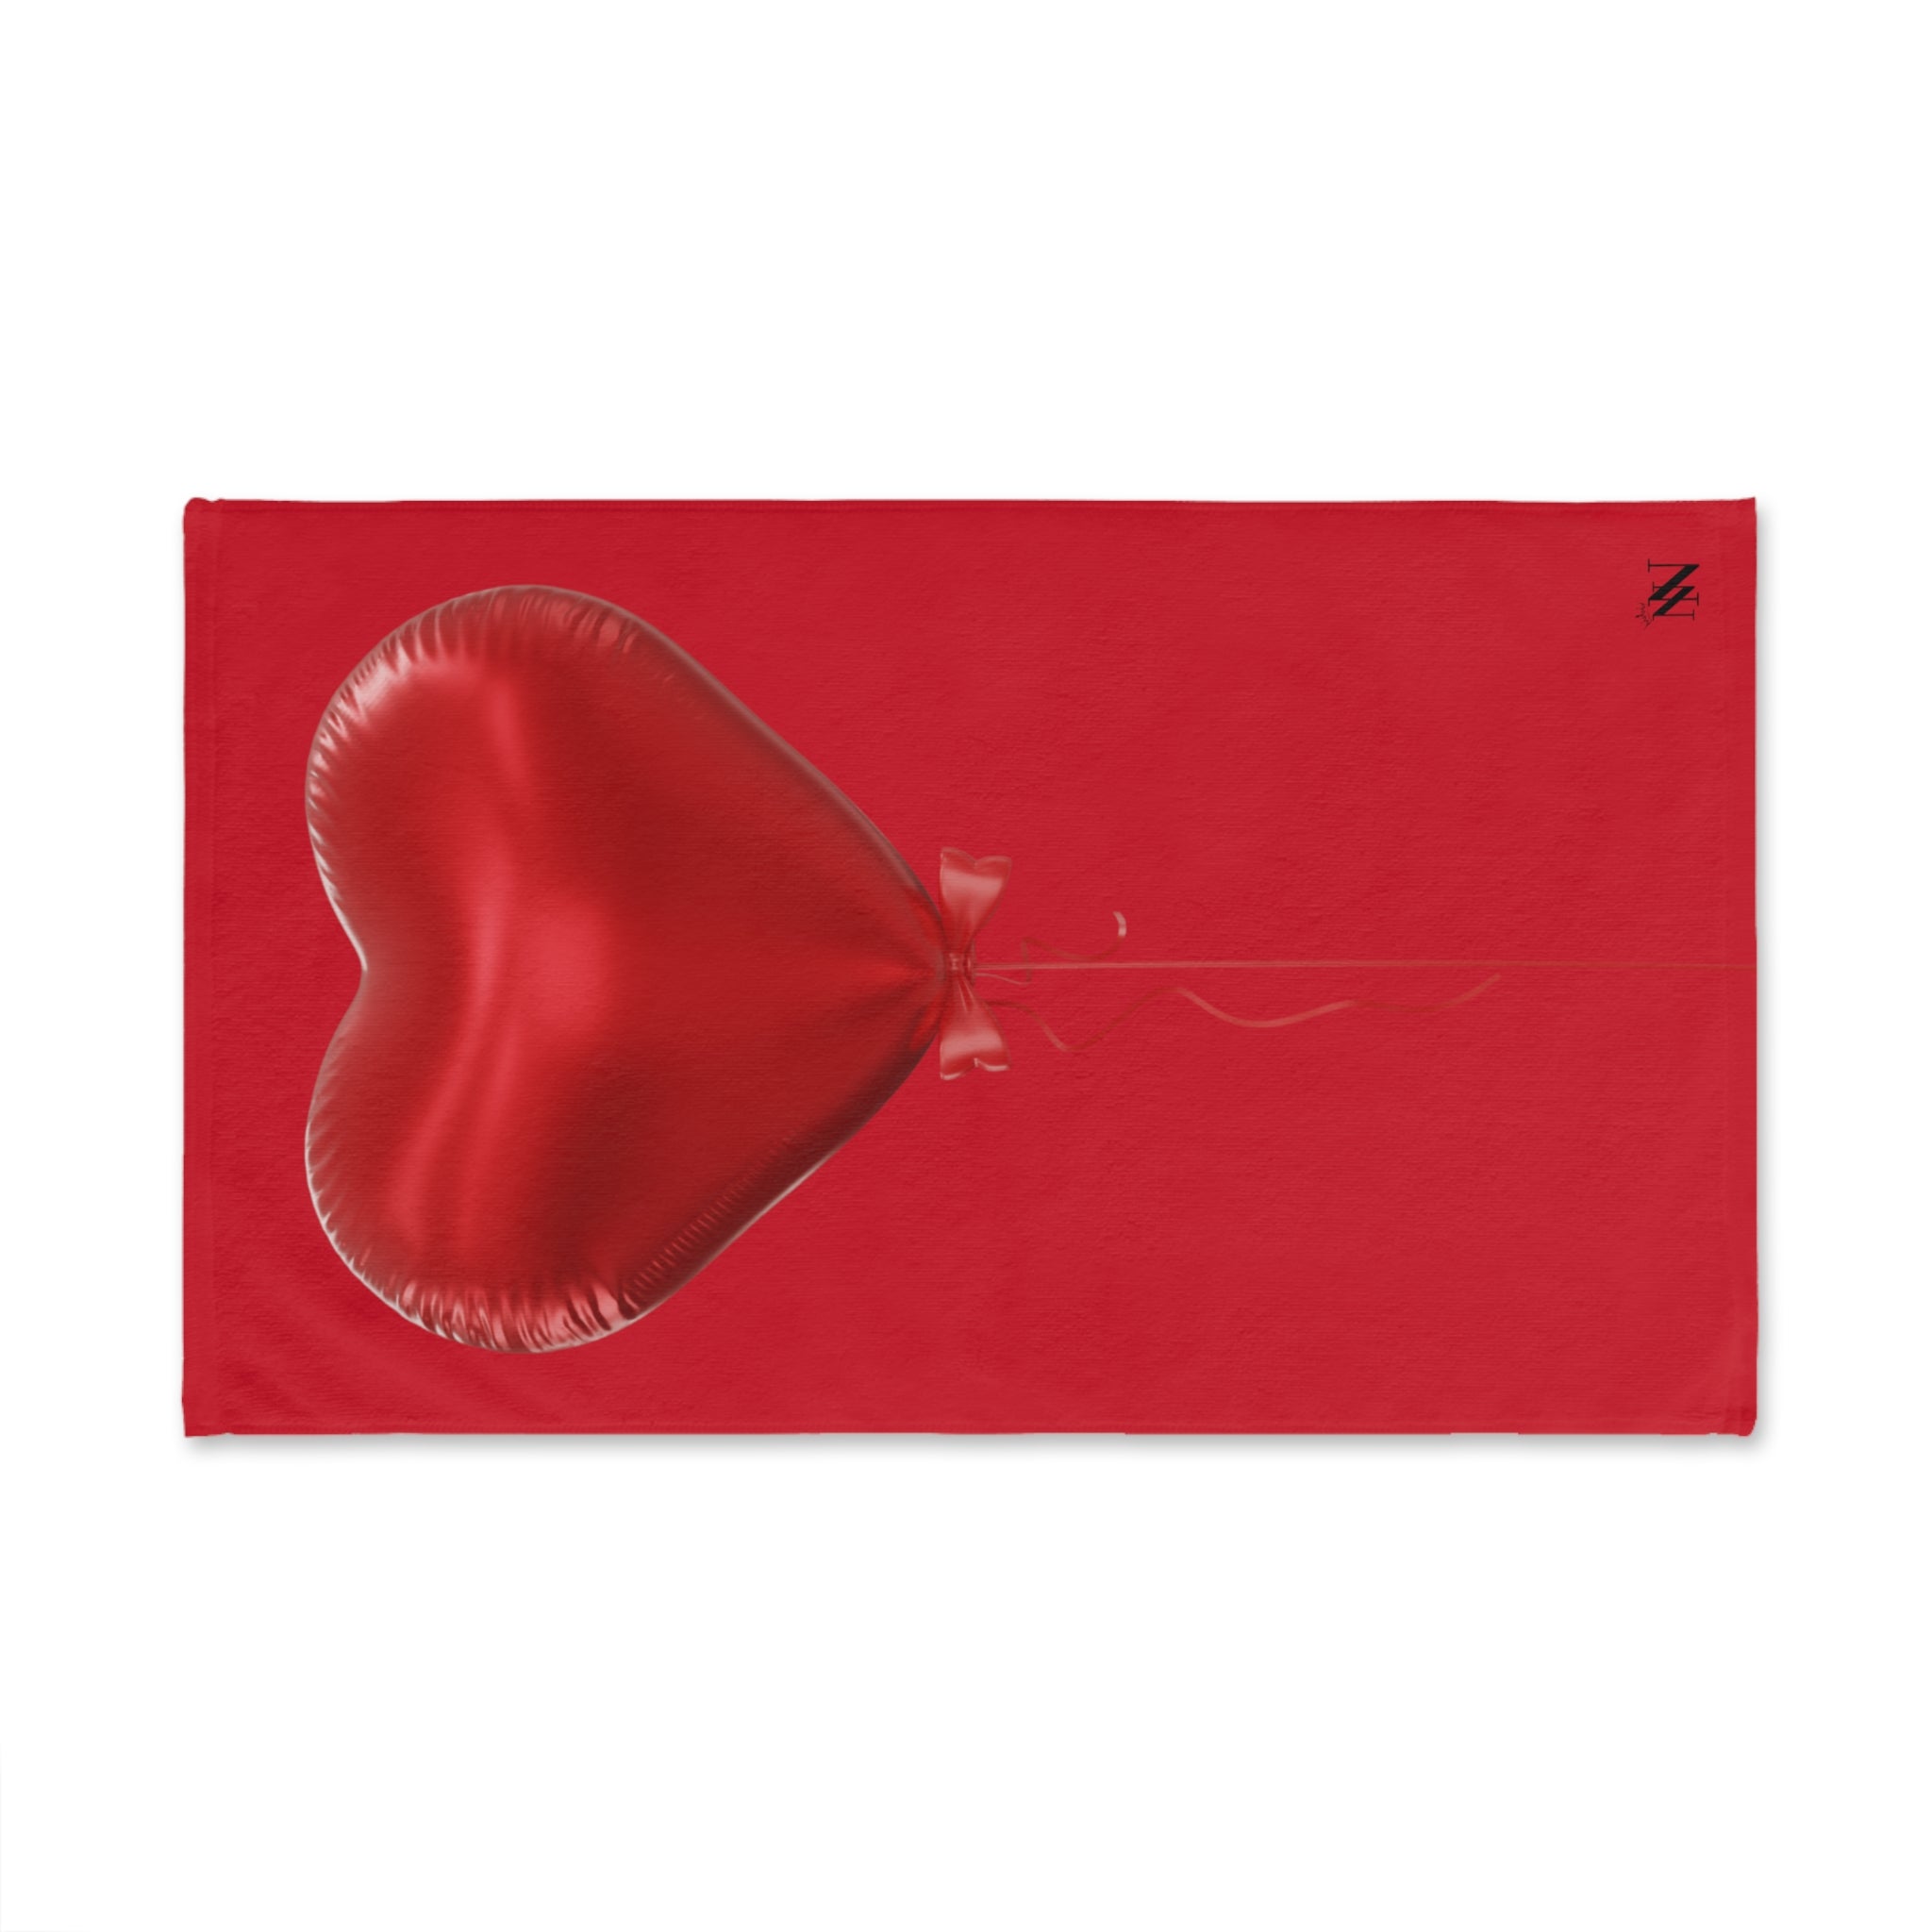 Red Balloon 3D Red | Sexy Gifts for Boyfriend, Funny Towel Romantic Gift for Wedding Couple Fiance First Year 2nd Anniversary Valentines, Party Gag Gifts, Joke Humor Cloth for Husband Men BF NECTAR NAPKINS